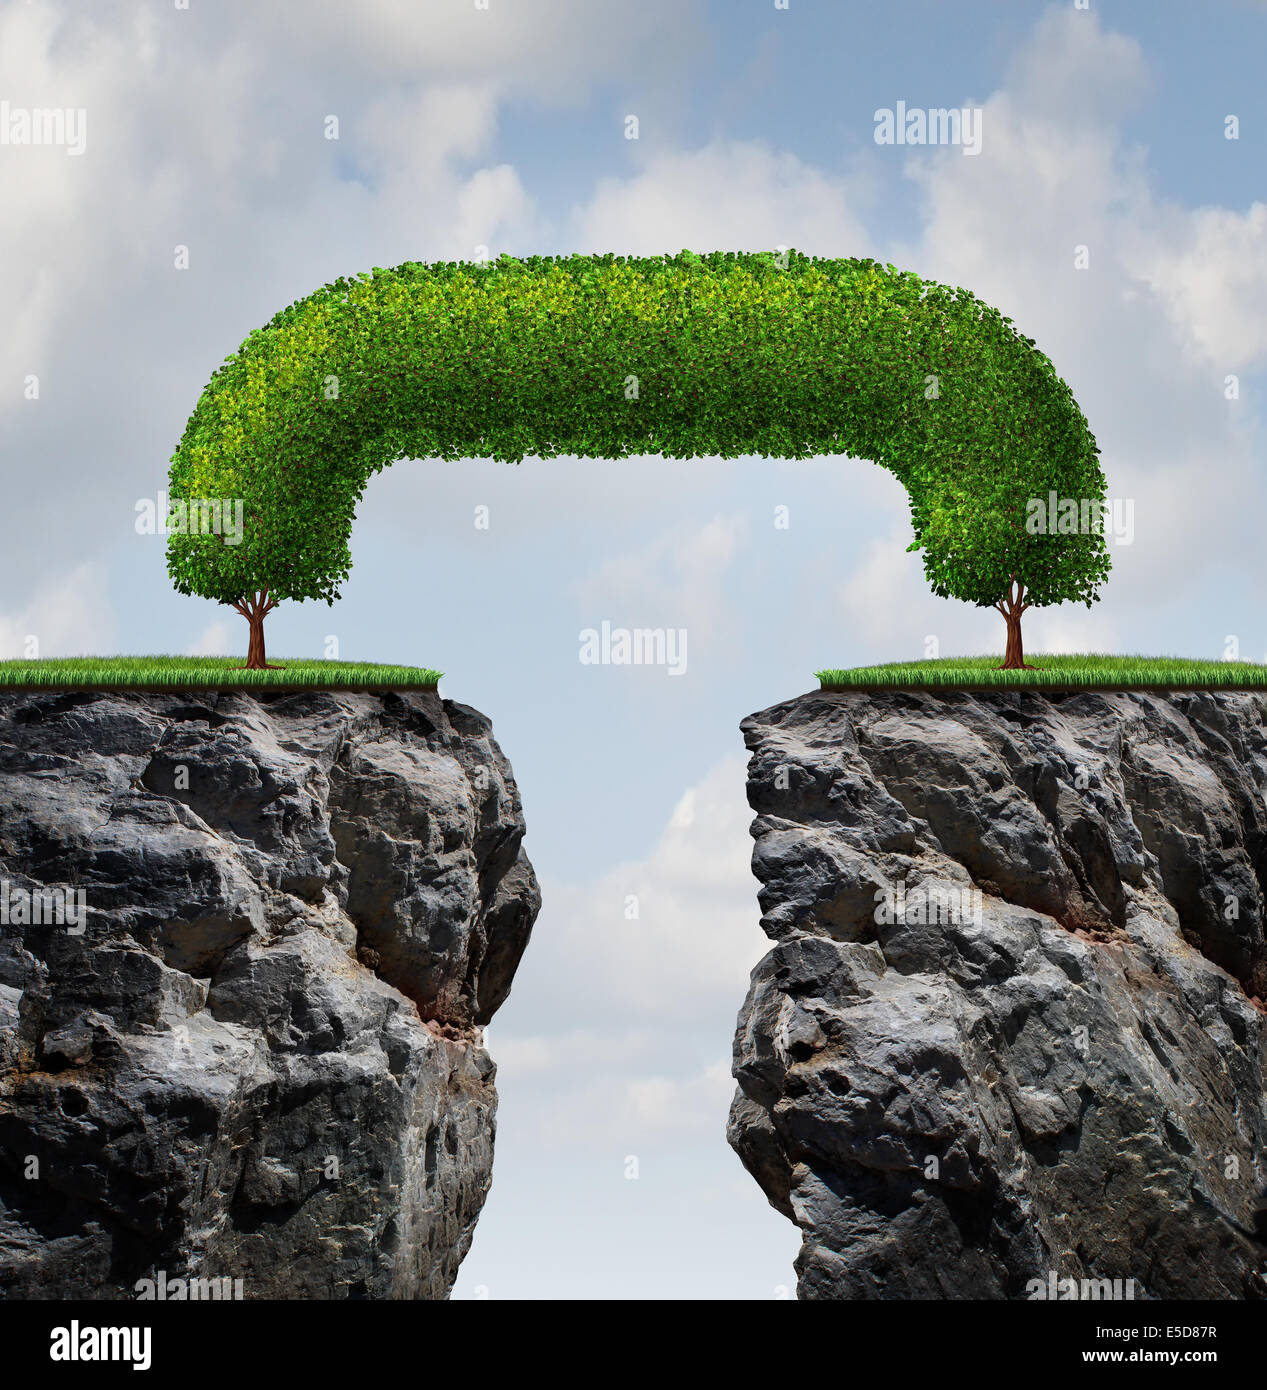 Bridge the gap business concept as two trees on a high steep cliff leaning towards each other bridging together to form a mutual Stock Photo